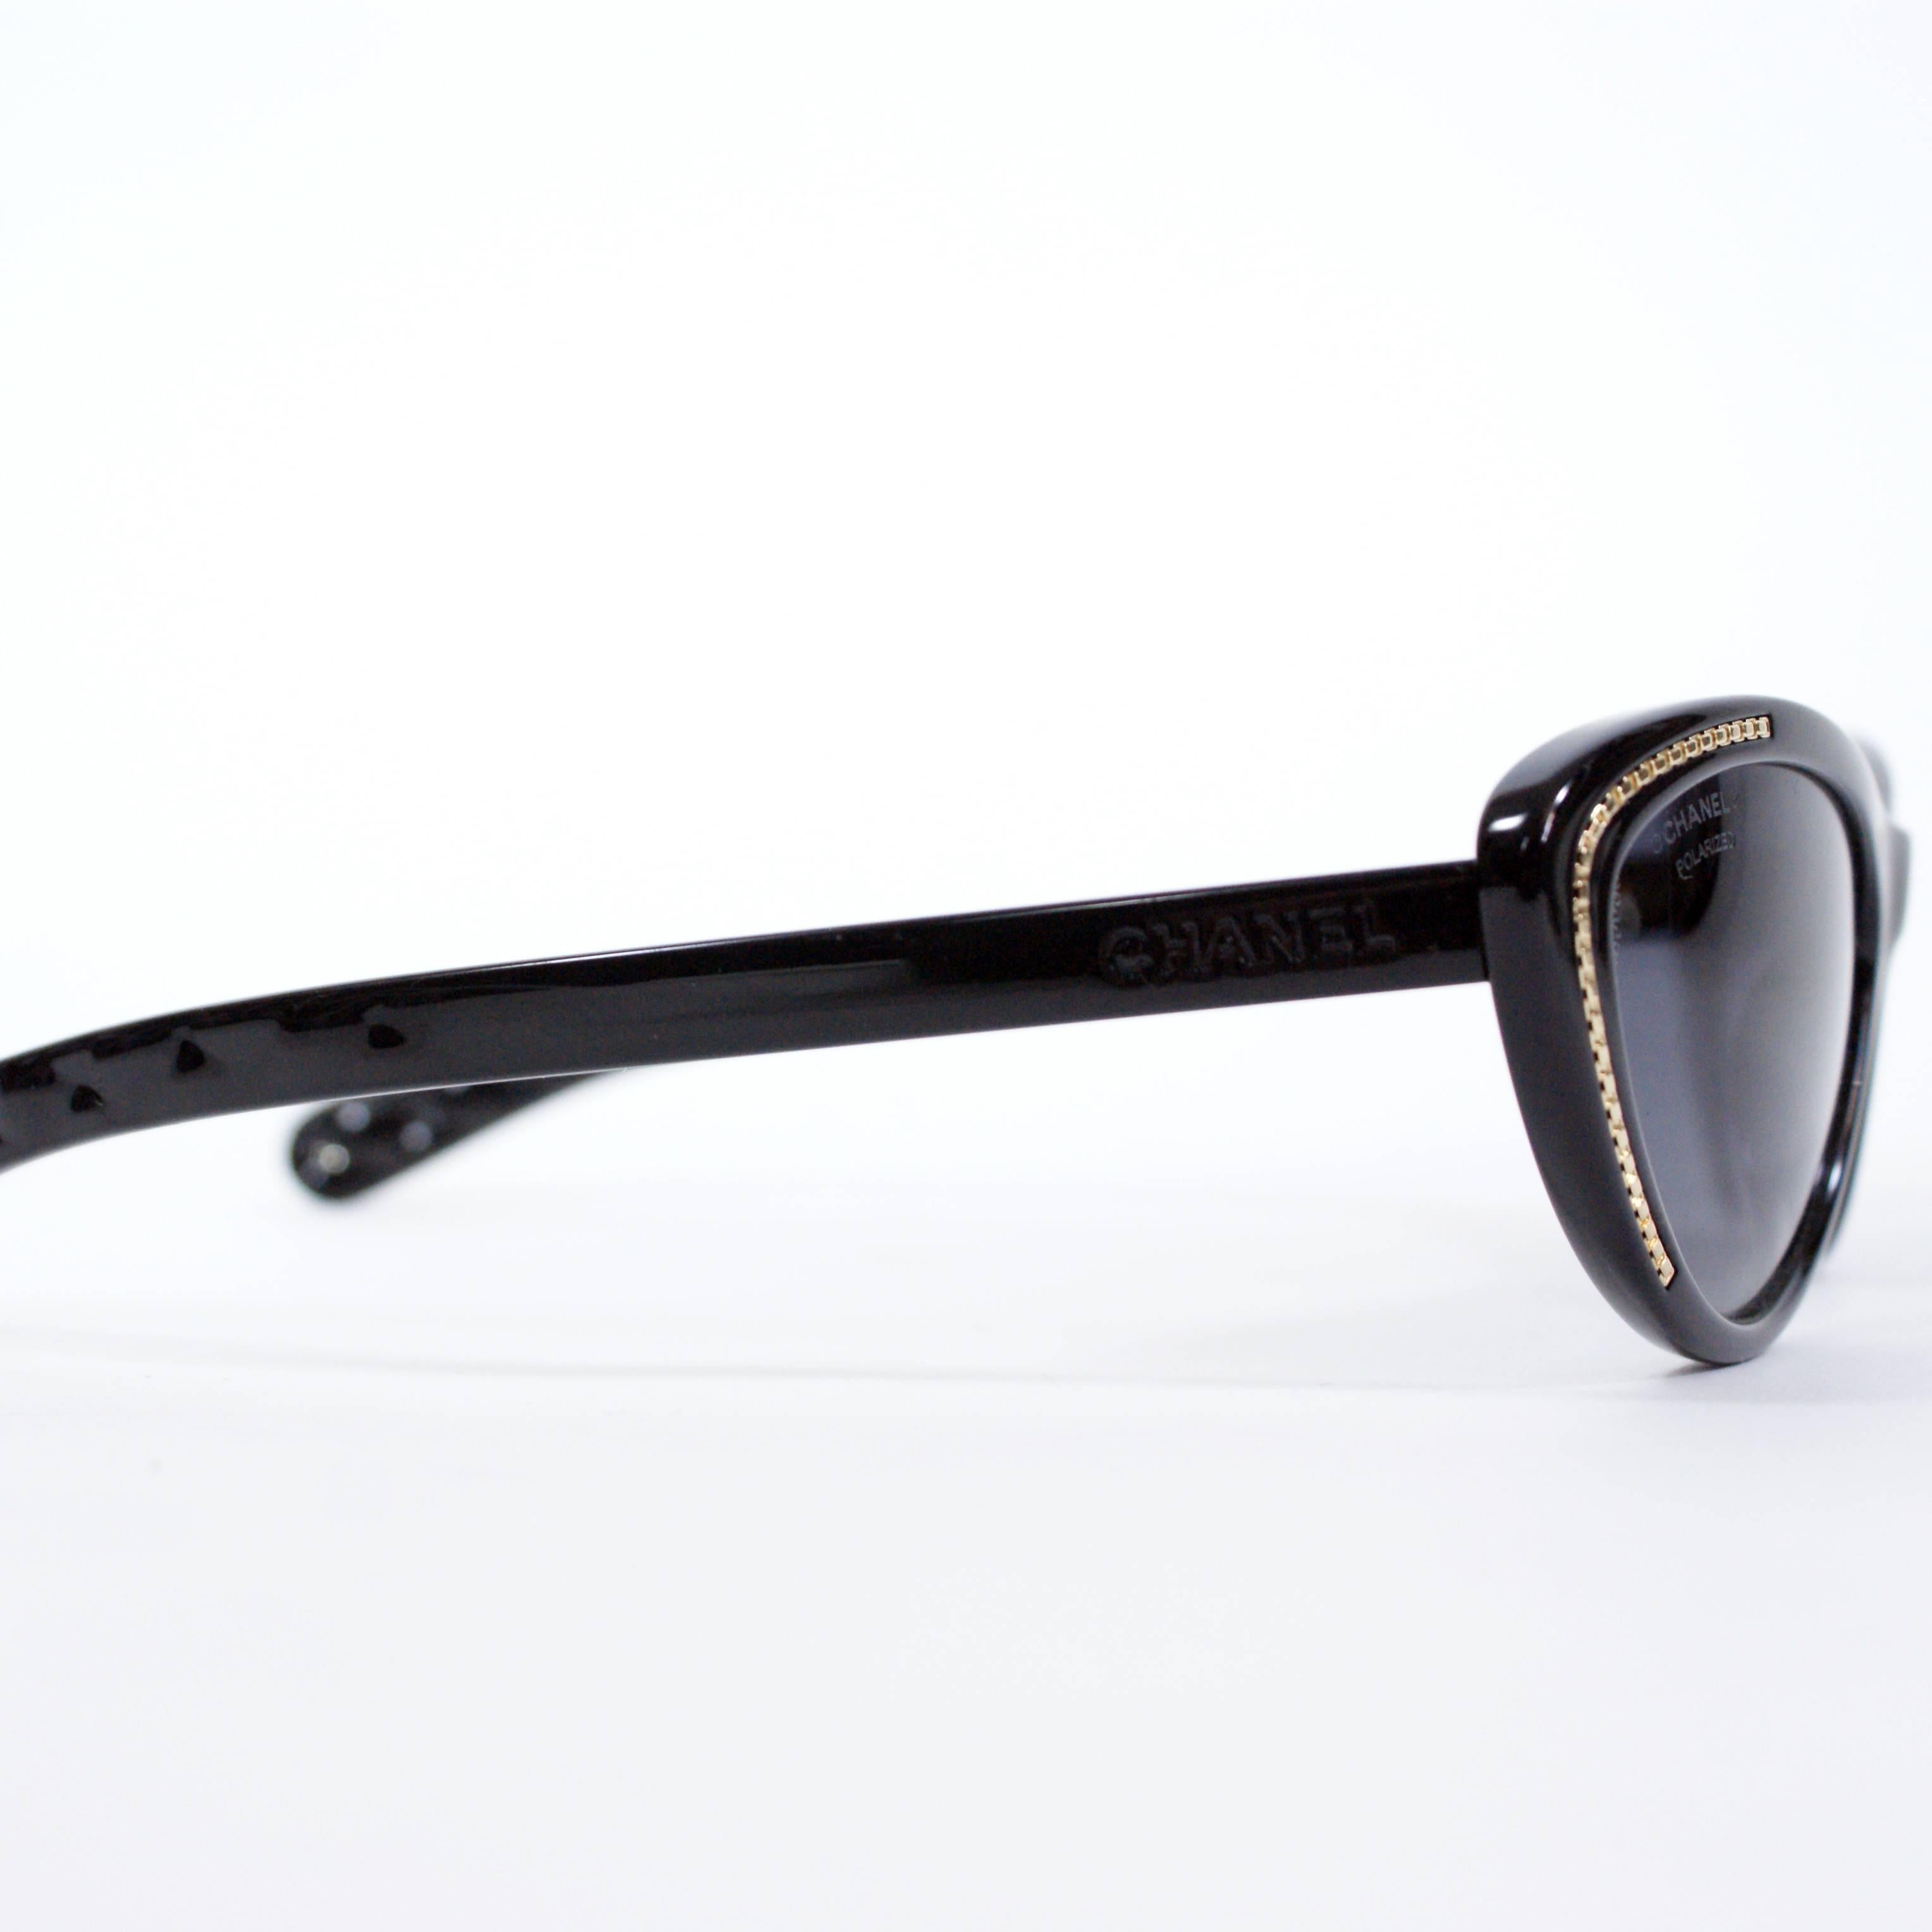 Chanel Cat-Eye Black Sunglasses In New Condition For Sale In Narberth, PA